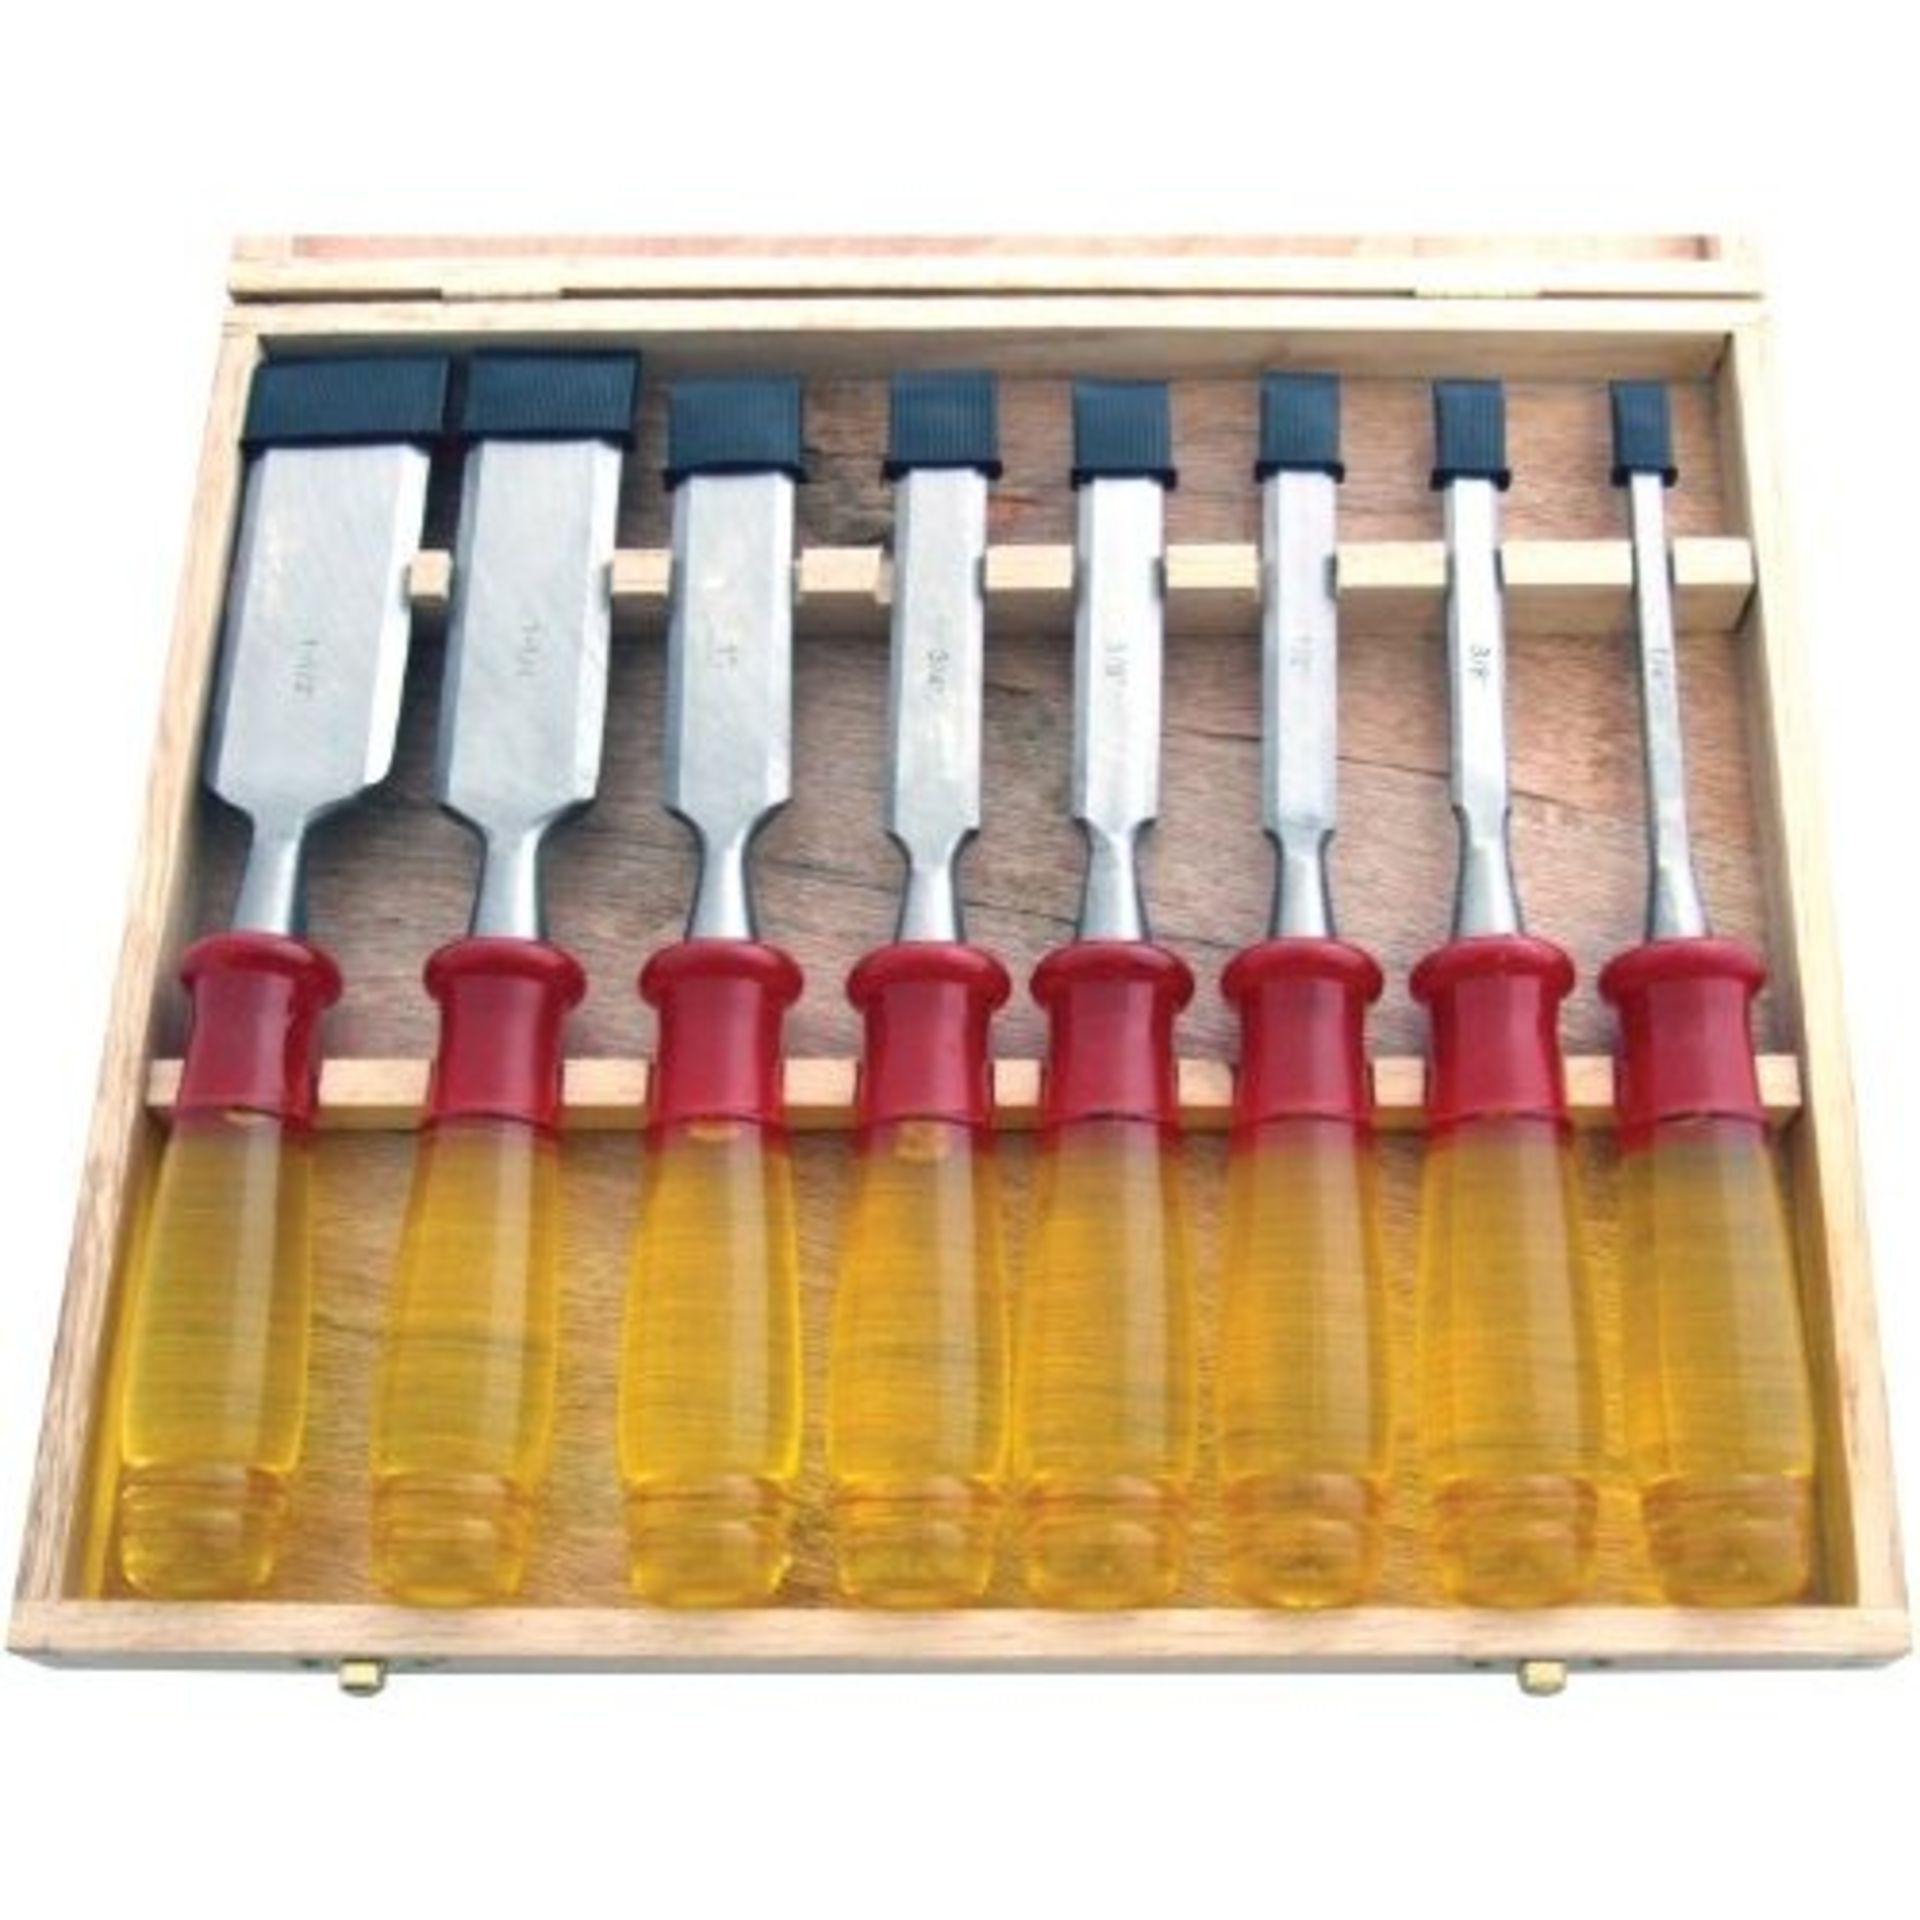 V Brand New Eight Piece Professional Chisel Set With Wooden Storage Case